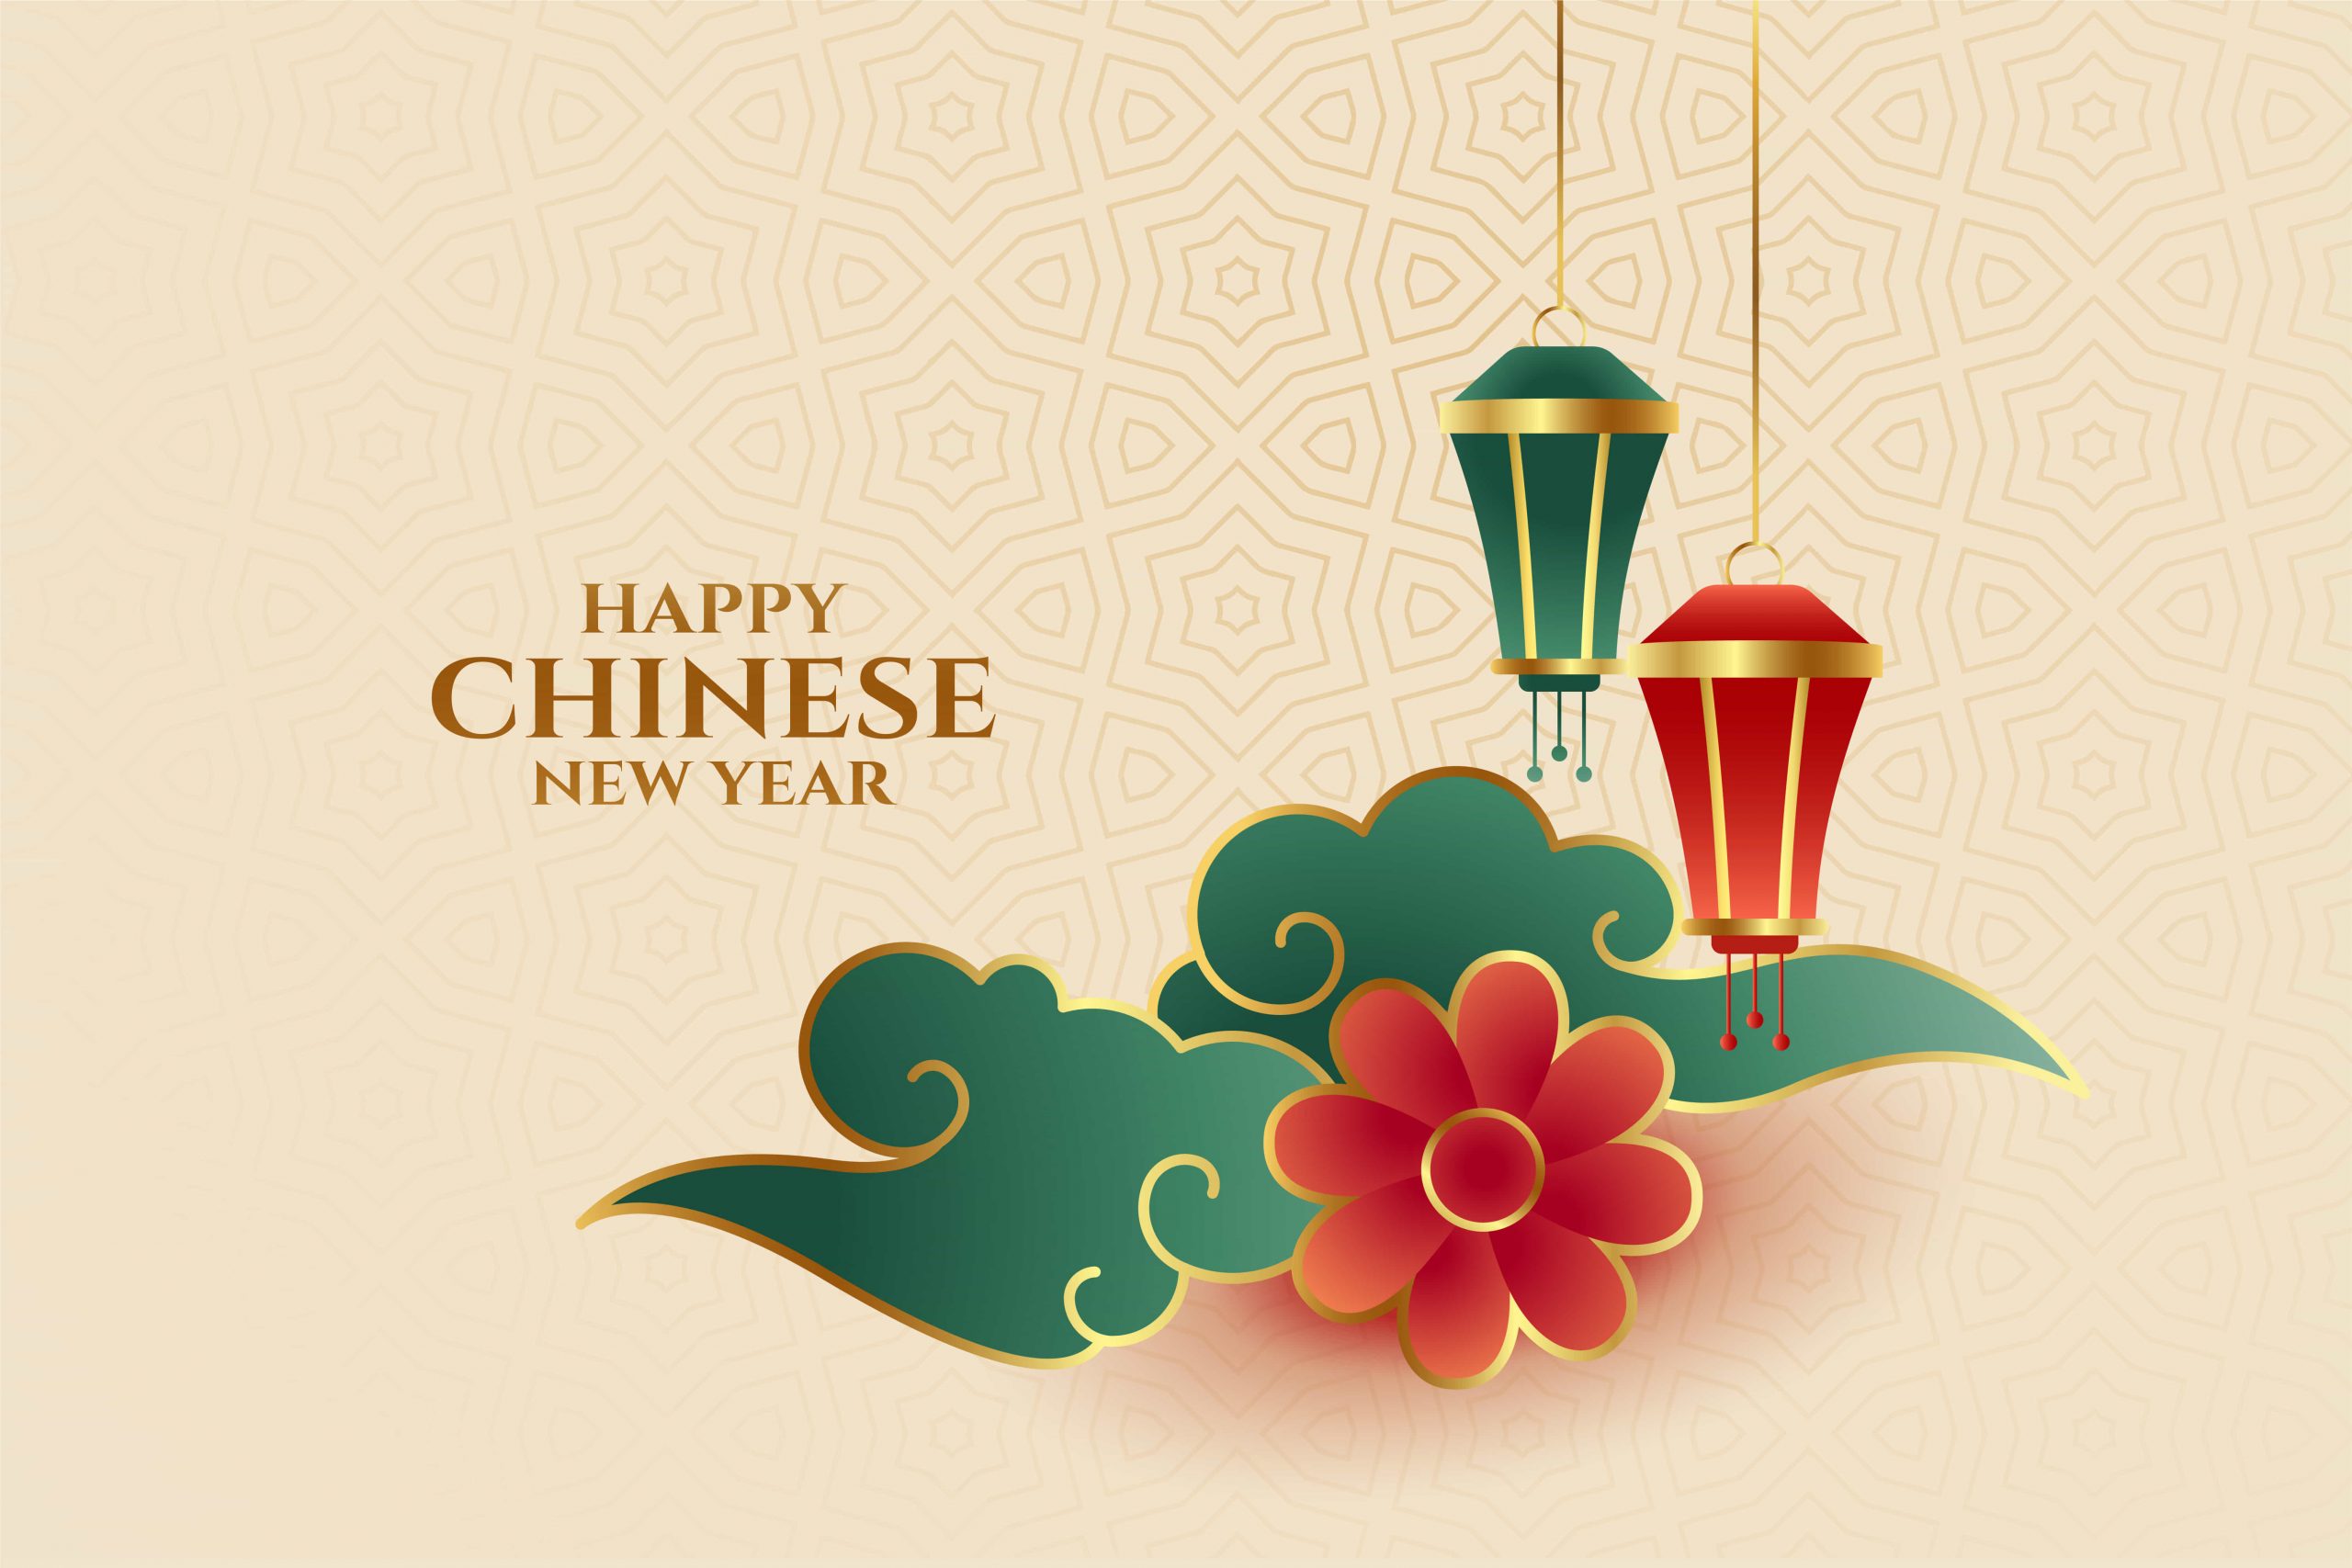 happy Chinese new year Wallpaper Download